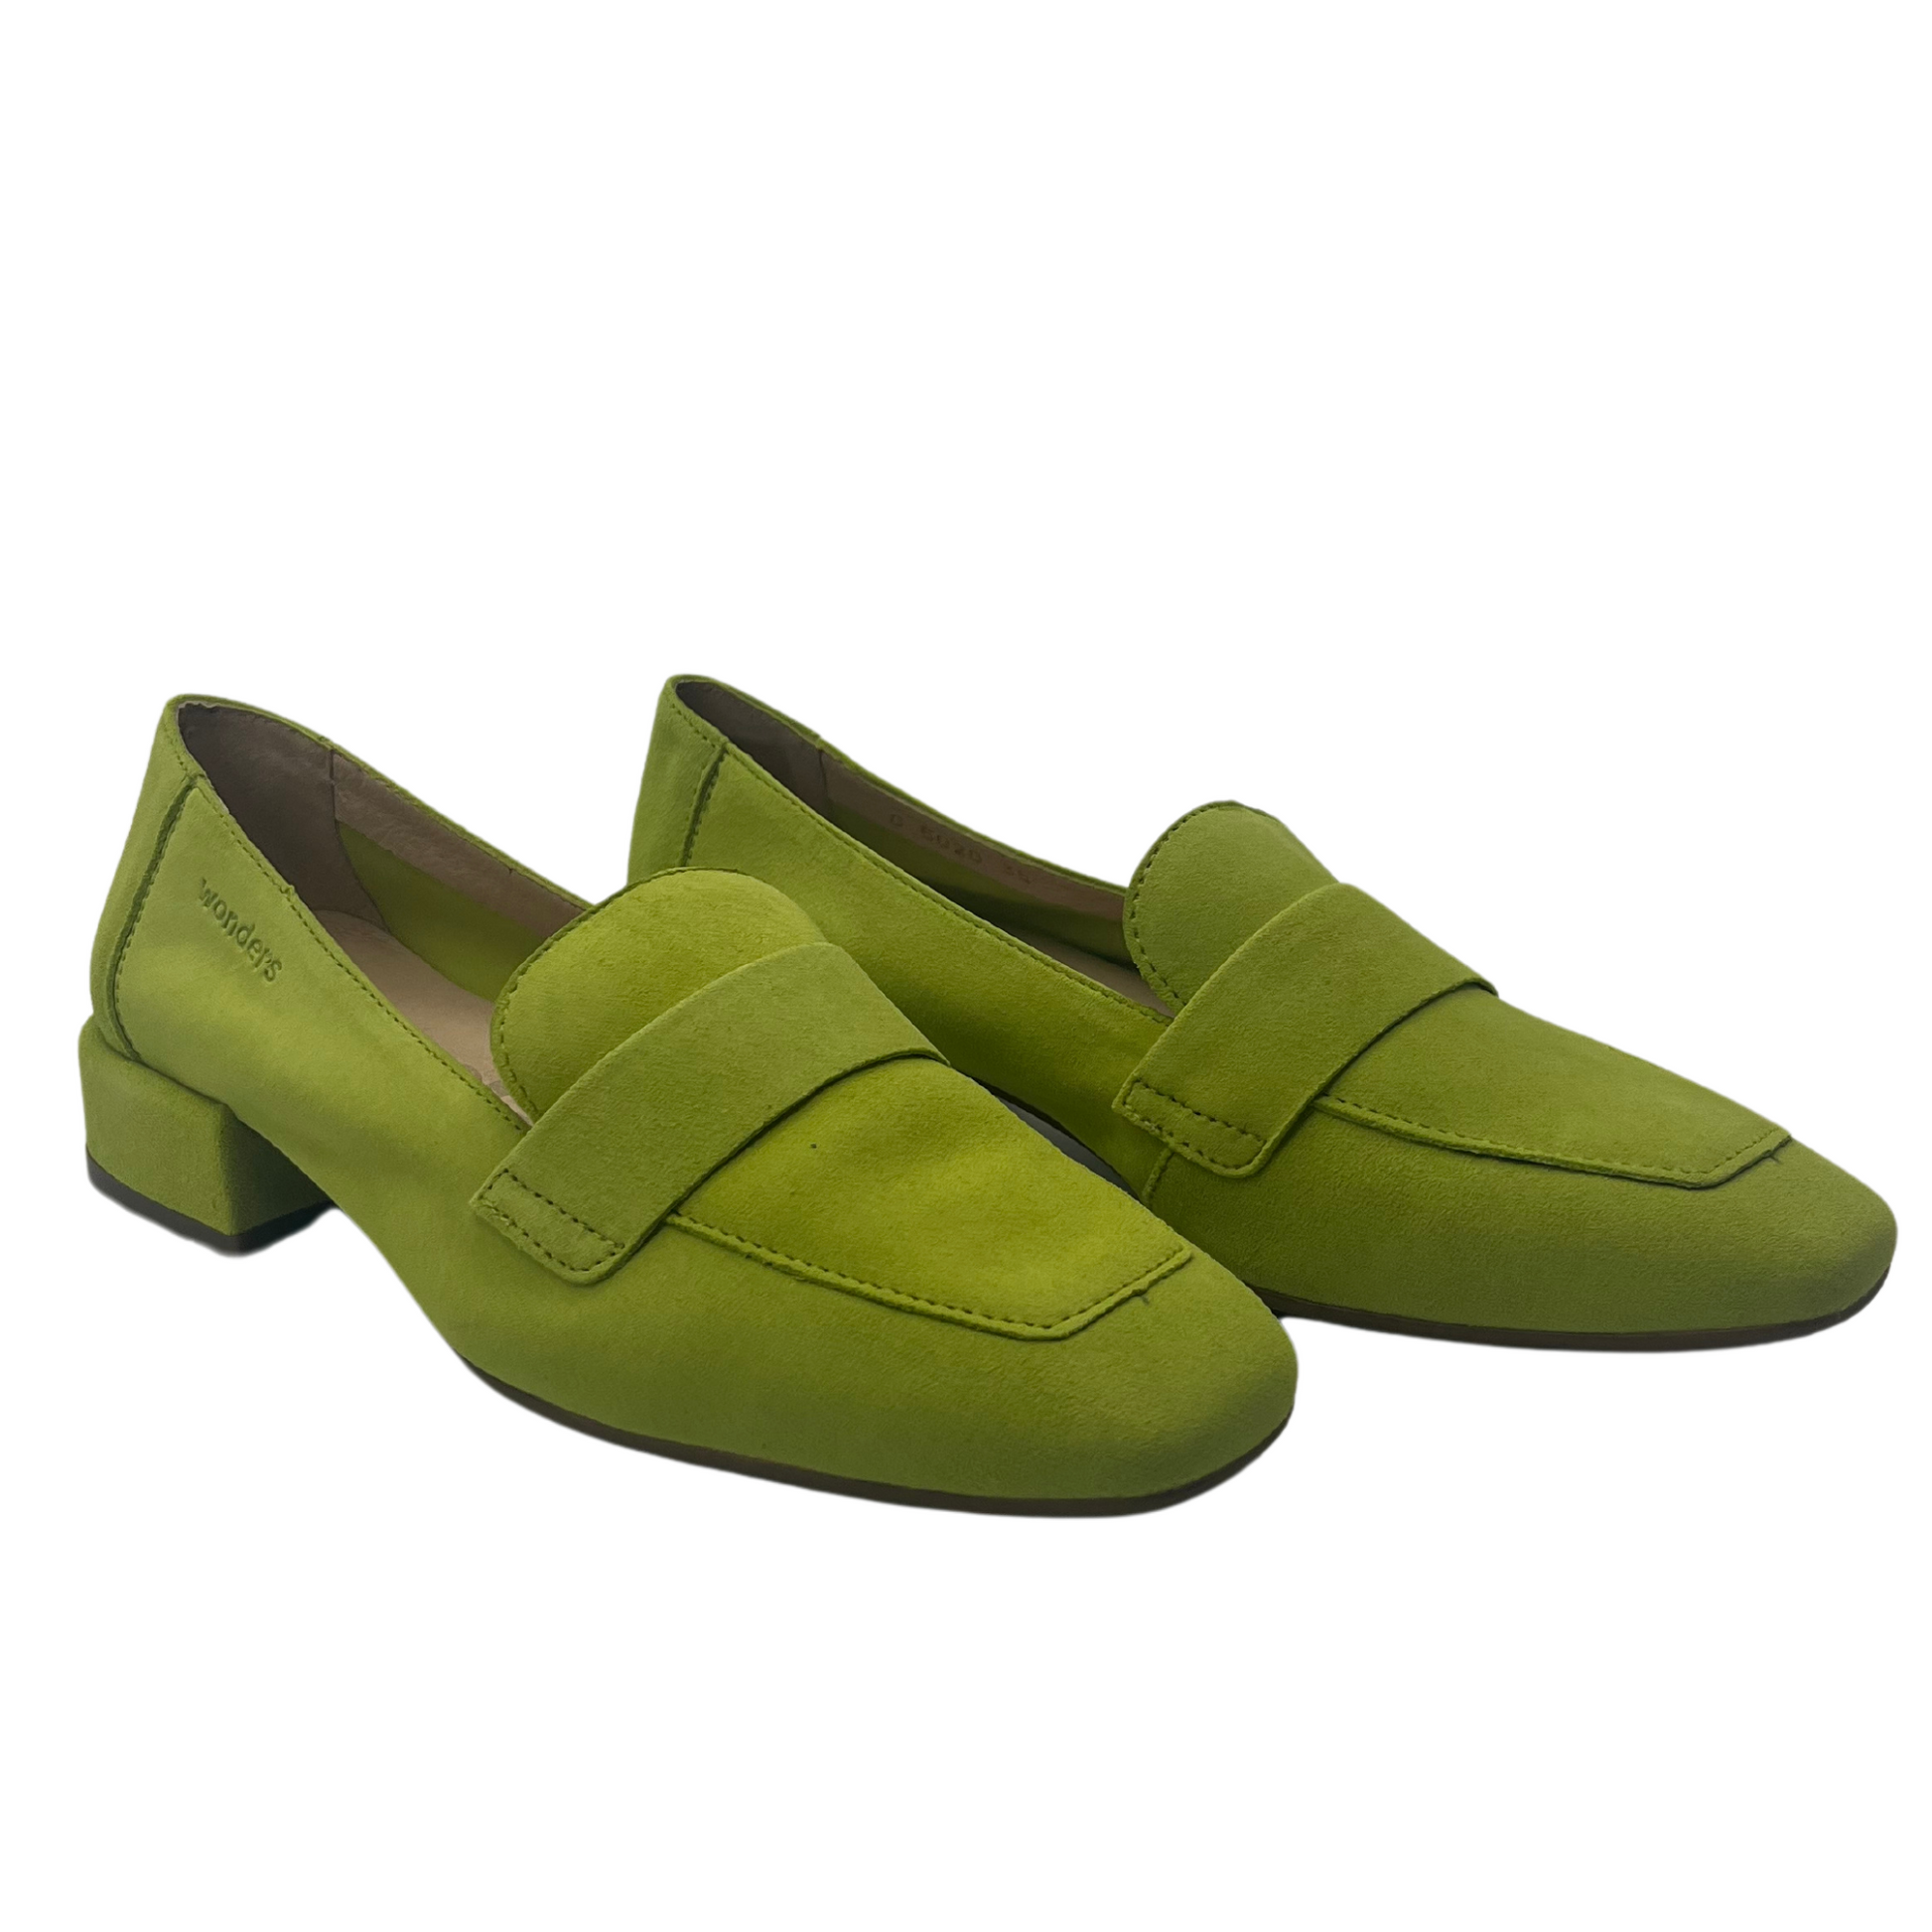 45 degree angled view of apple green suede leather loafers with short block heels and square toe